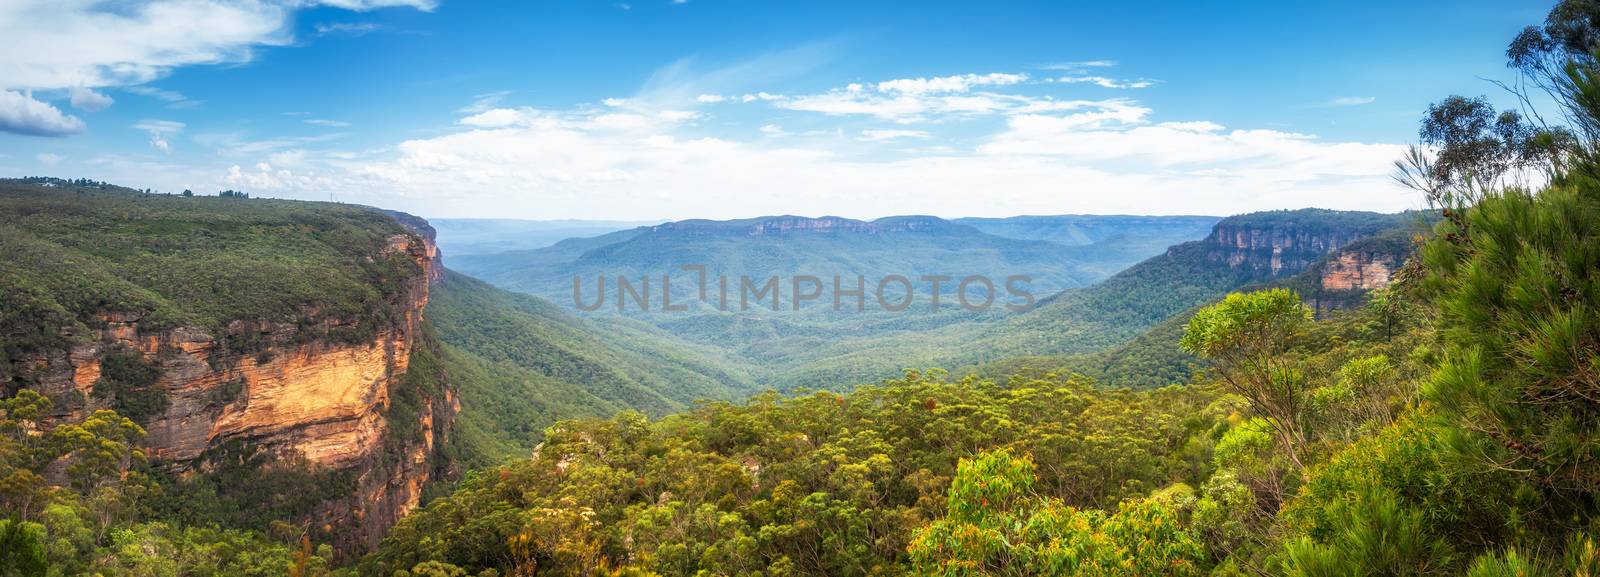 An image of the Blue Mountains Australia panorama